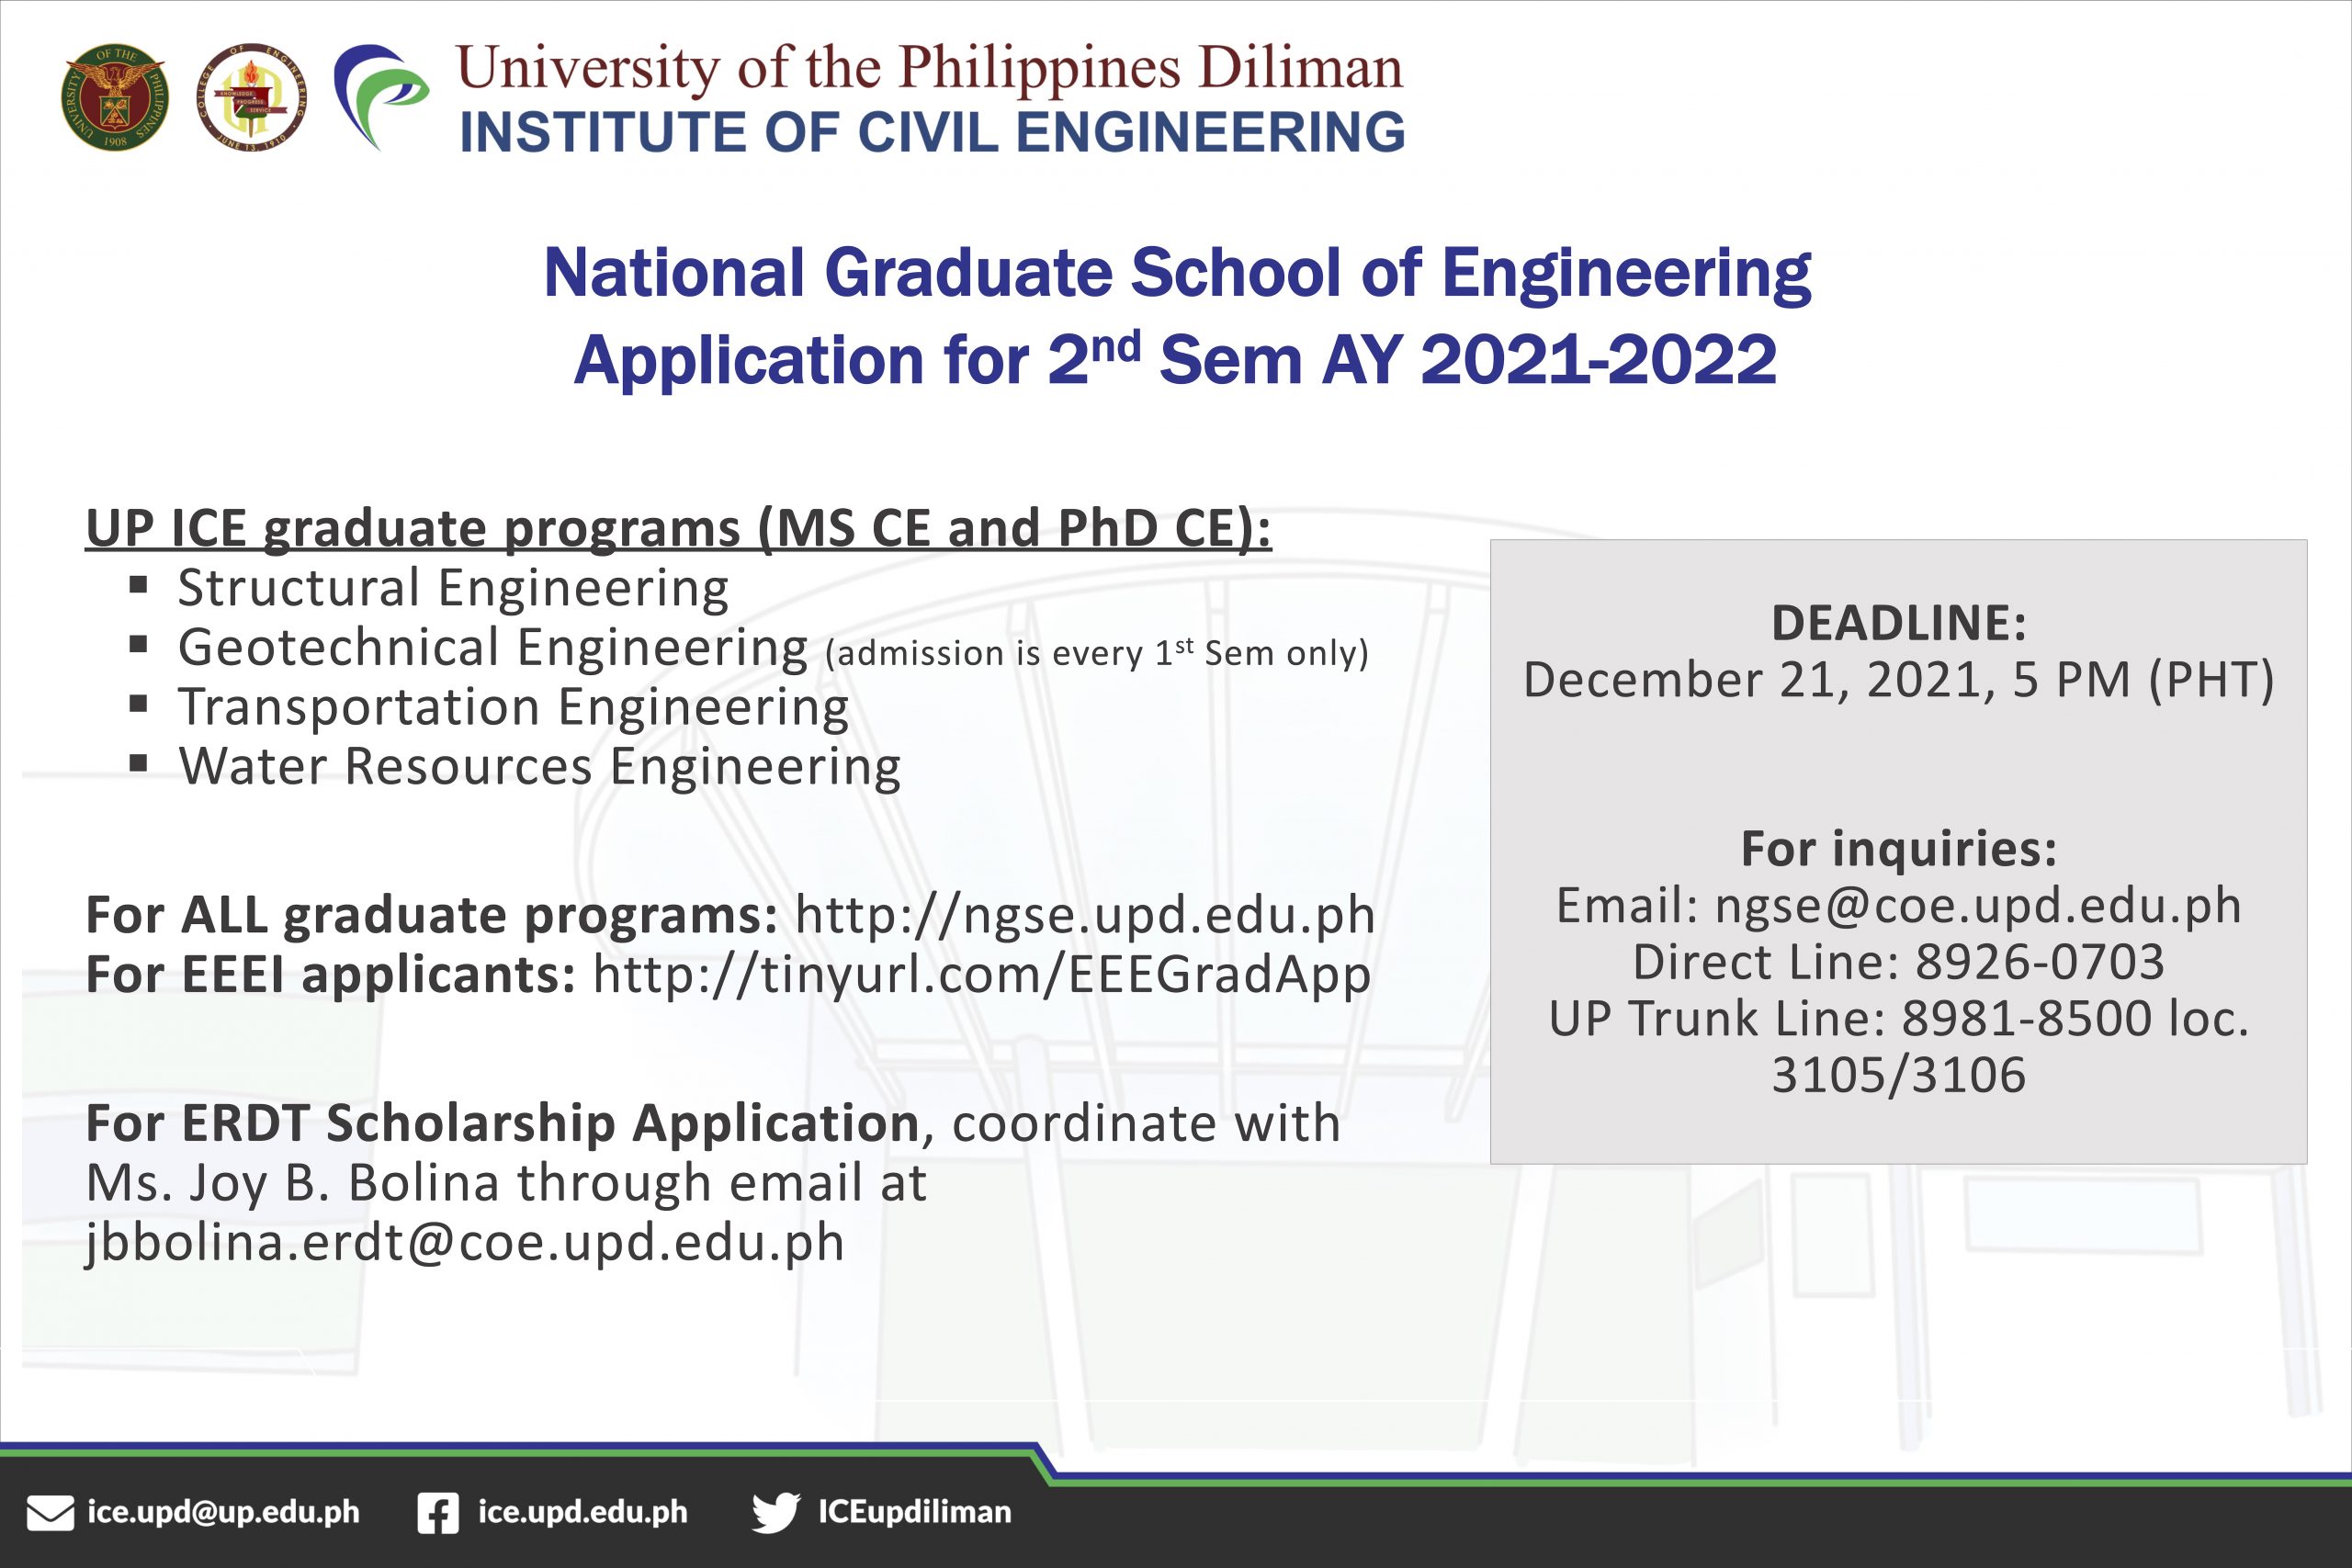 NGSE Applications for 2nd Sem, AY2021-2022